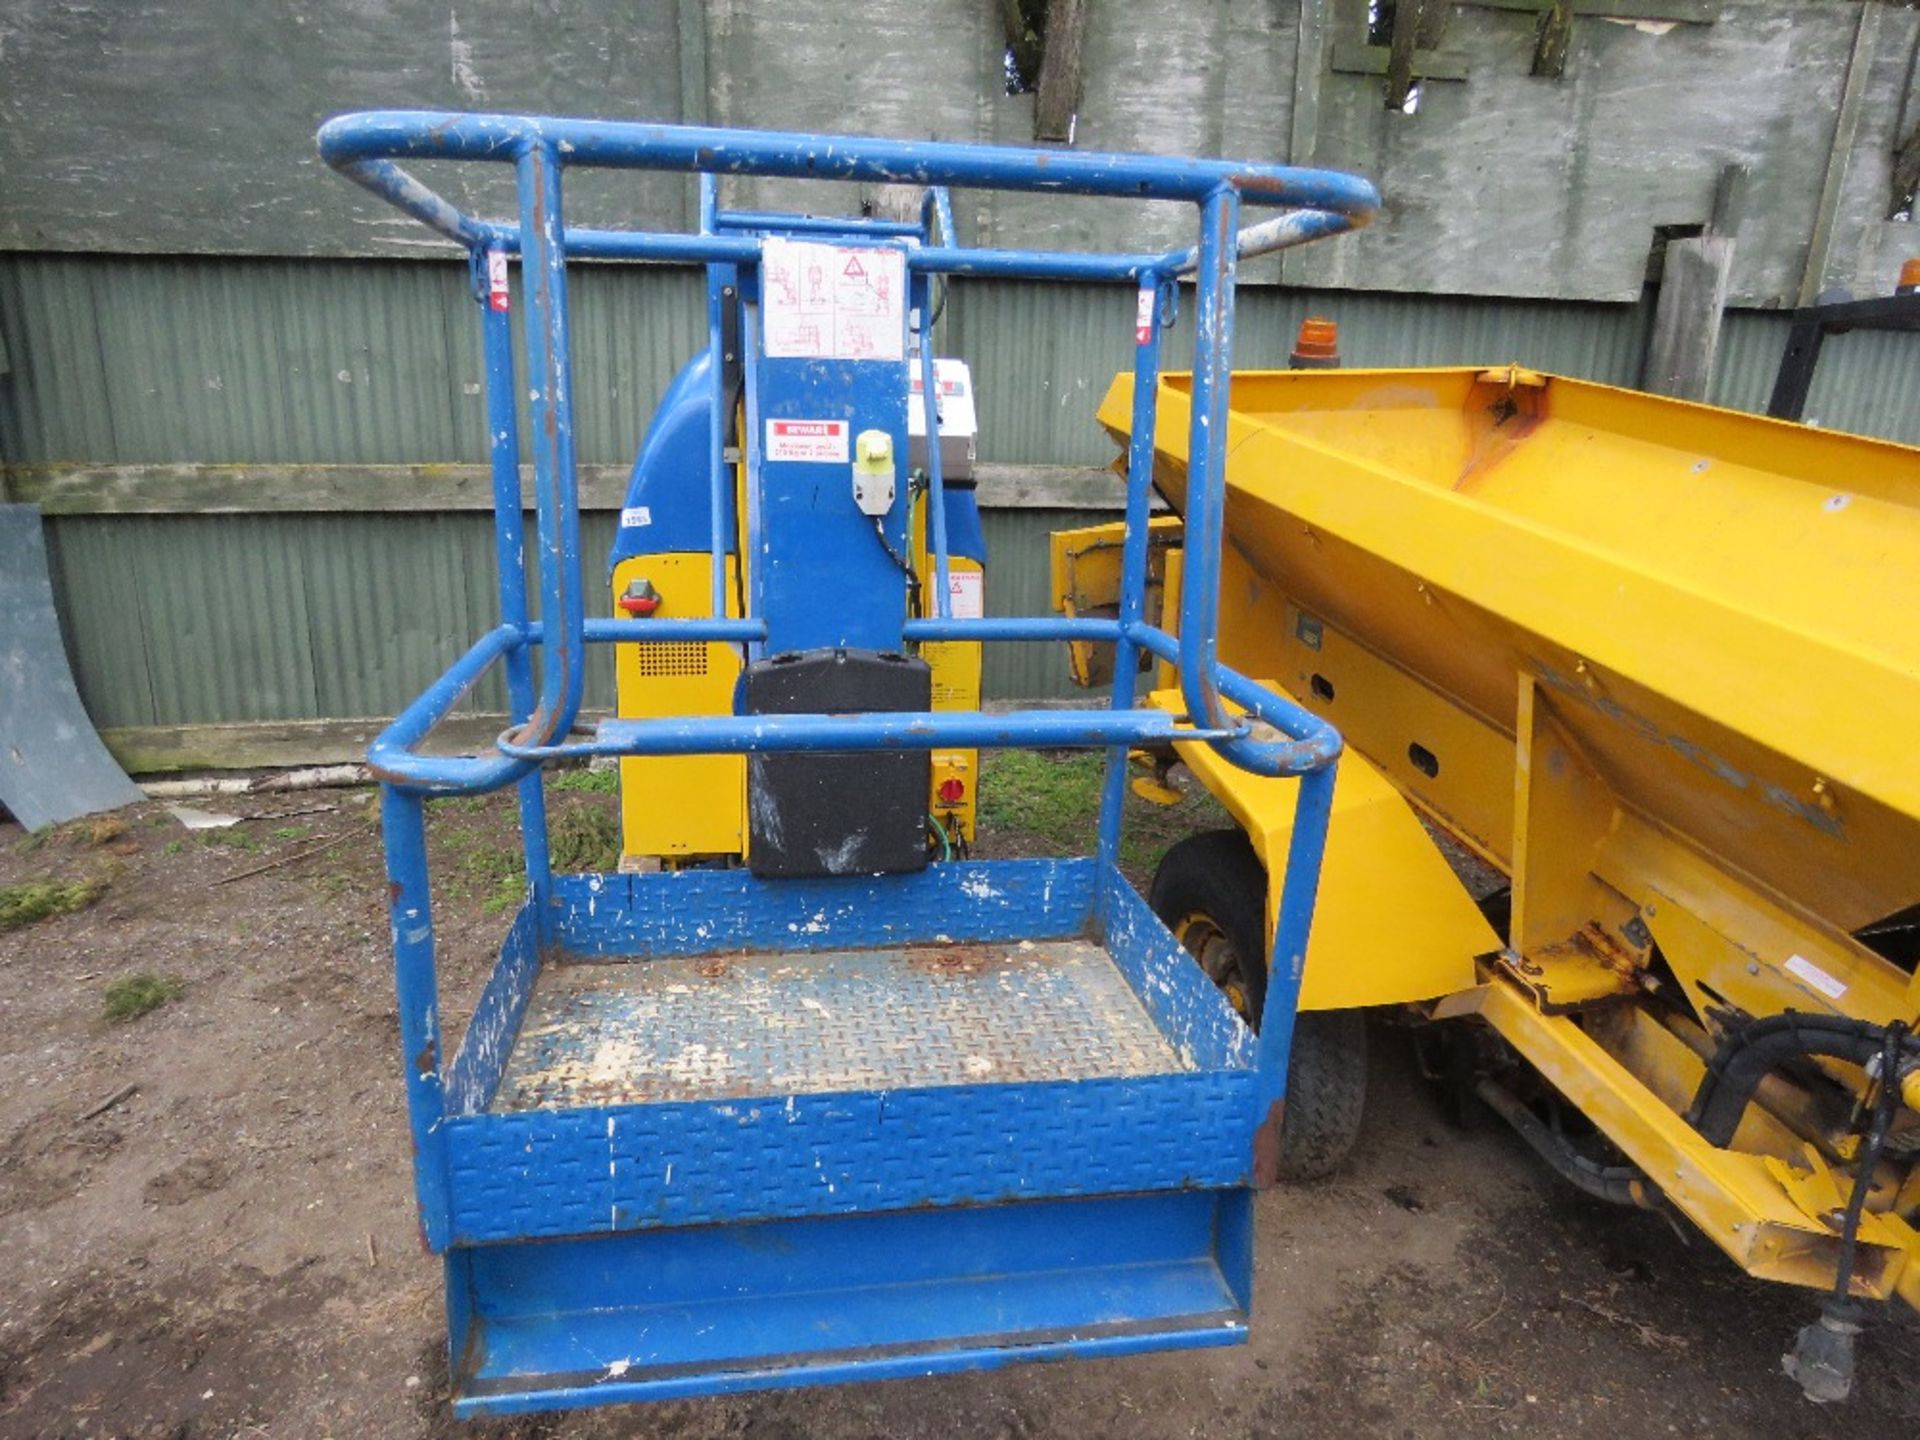 ABM ORION 1000 SELF PROPELLED 10 METRE MAST ACCESS LIFT UNIT WITH OUTRIGGERS YEAR 2001. SN:011006118 - Image 2 of 12